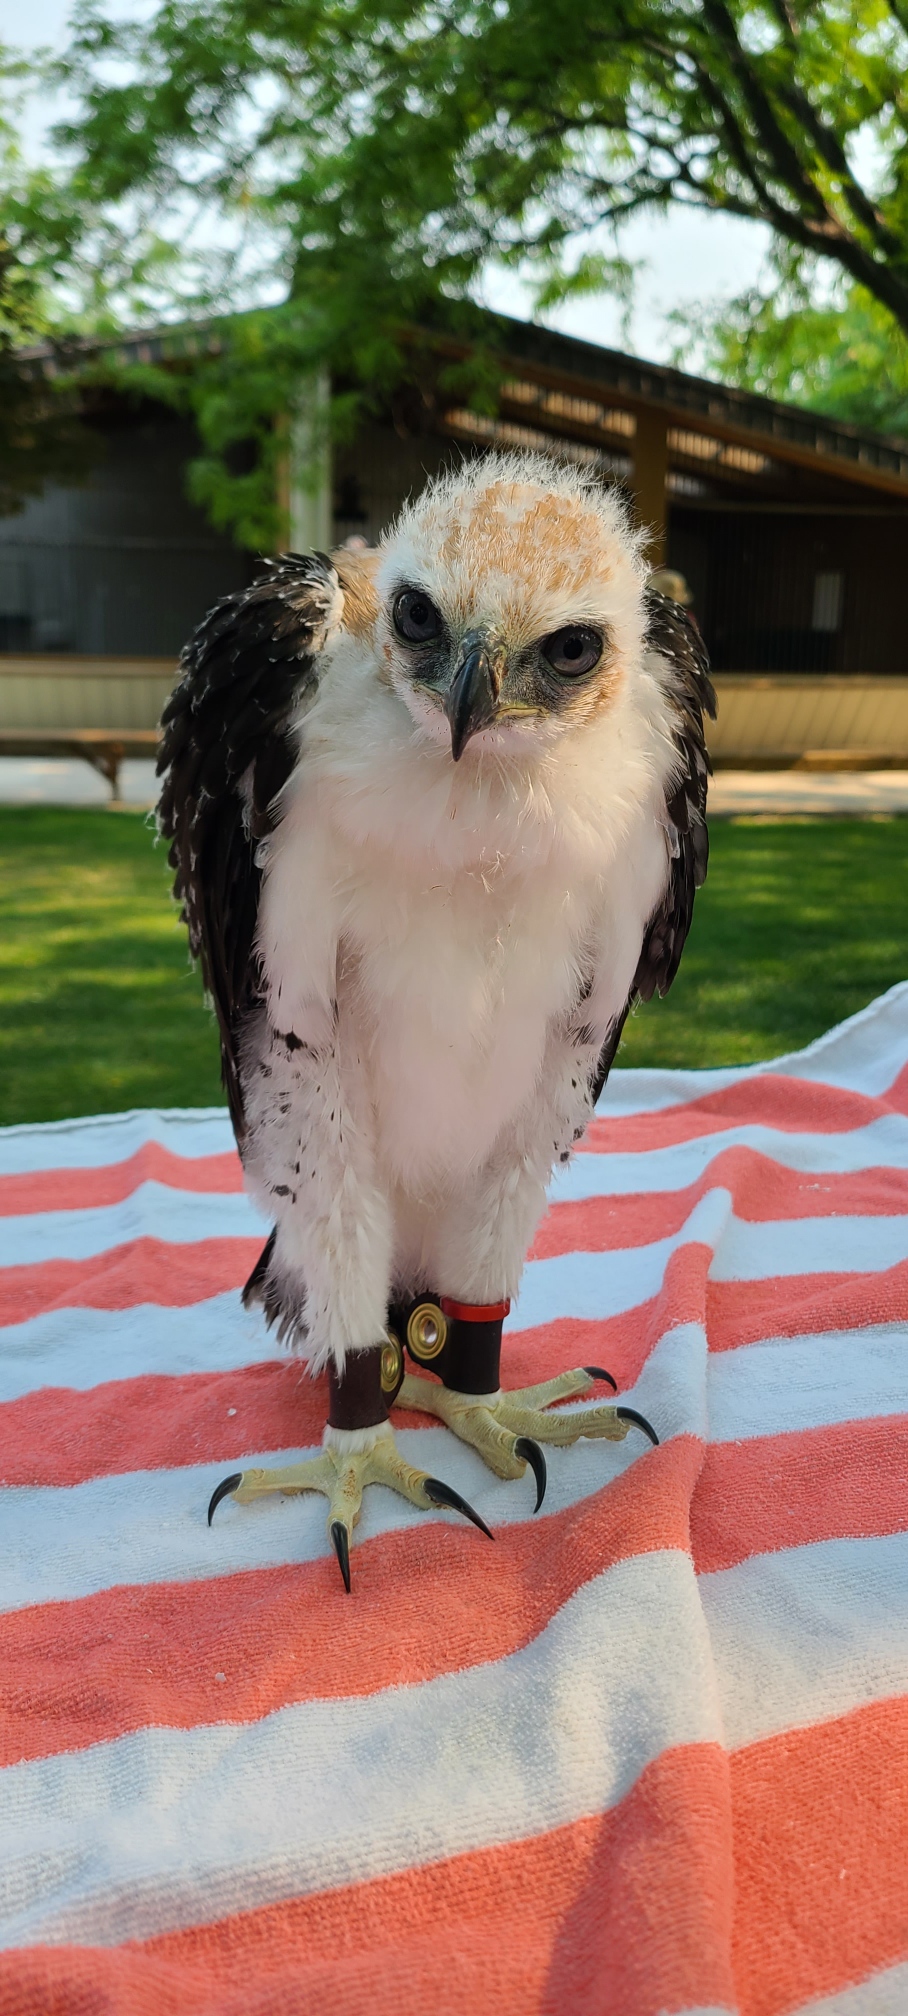 Tulio the Ornate Hawk-eagle stands on a towel in the World Center for Birds of Prey's courtyard. He is 52 days old in this photo.